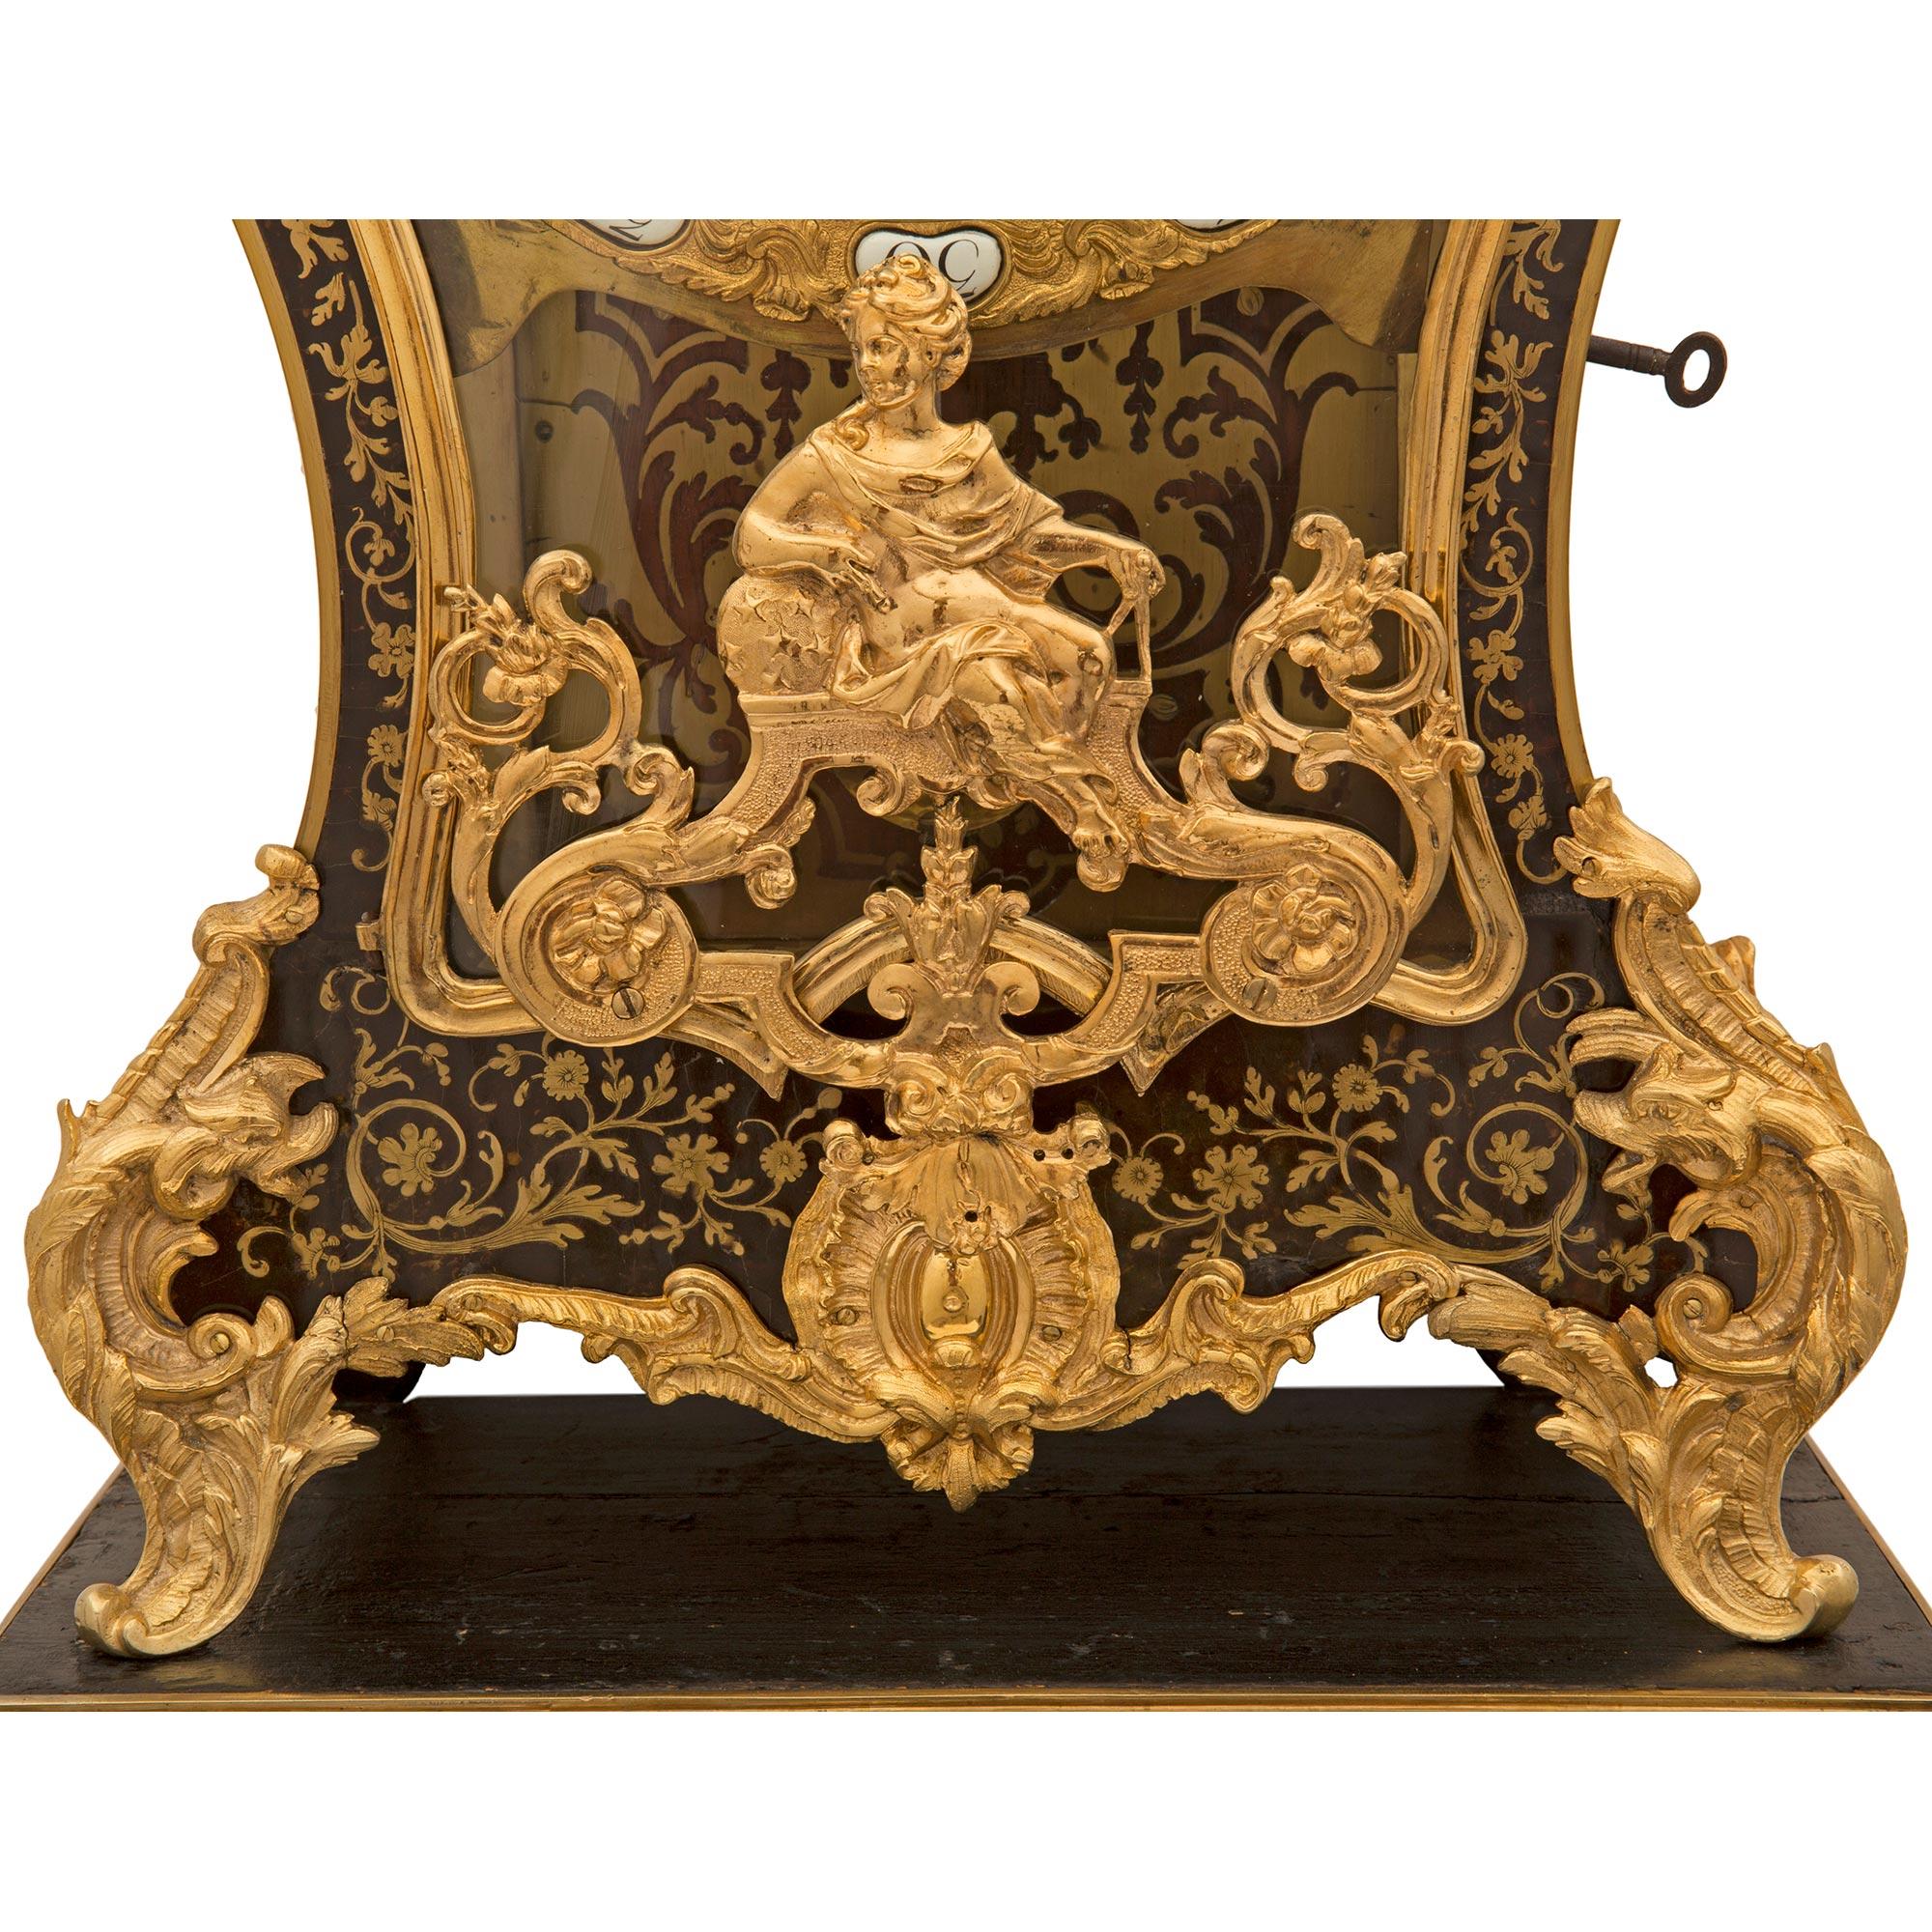 French 18th Century Louis XV Period Tortoiseshell and Ormolu Boulle Cartel Clock For Sale 2